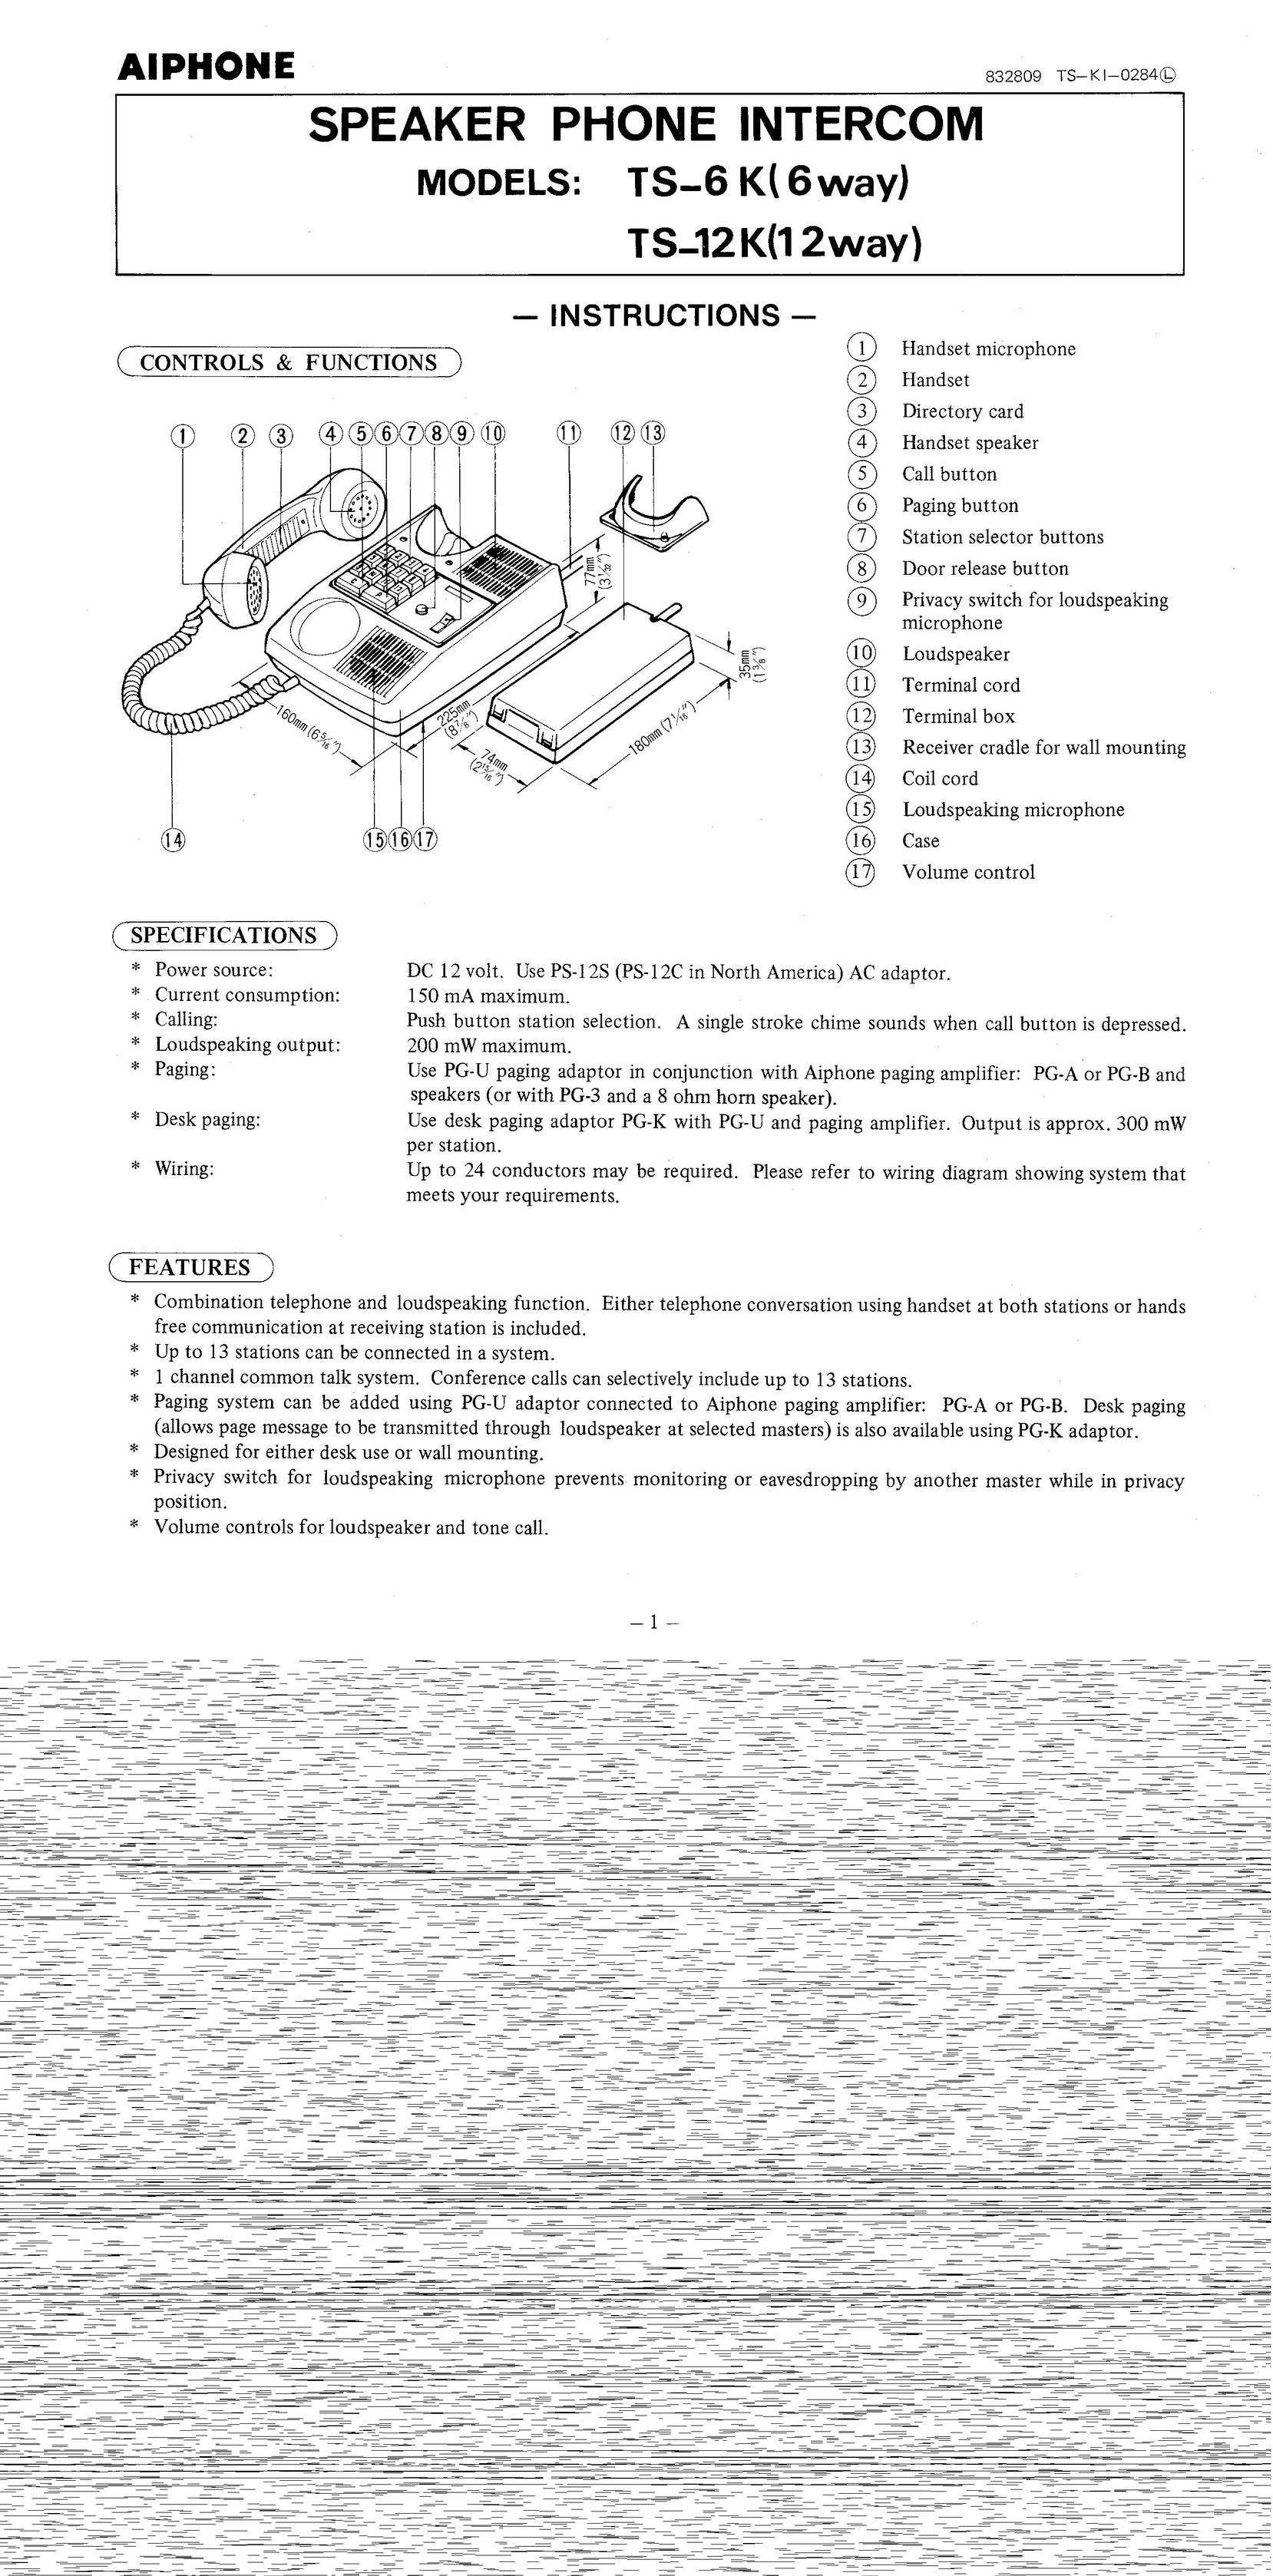 Aiphone TS-12K Conference Phone User Manual